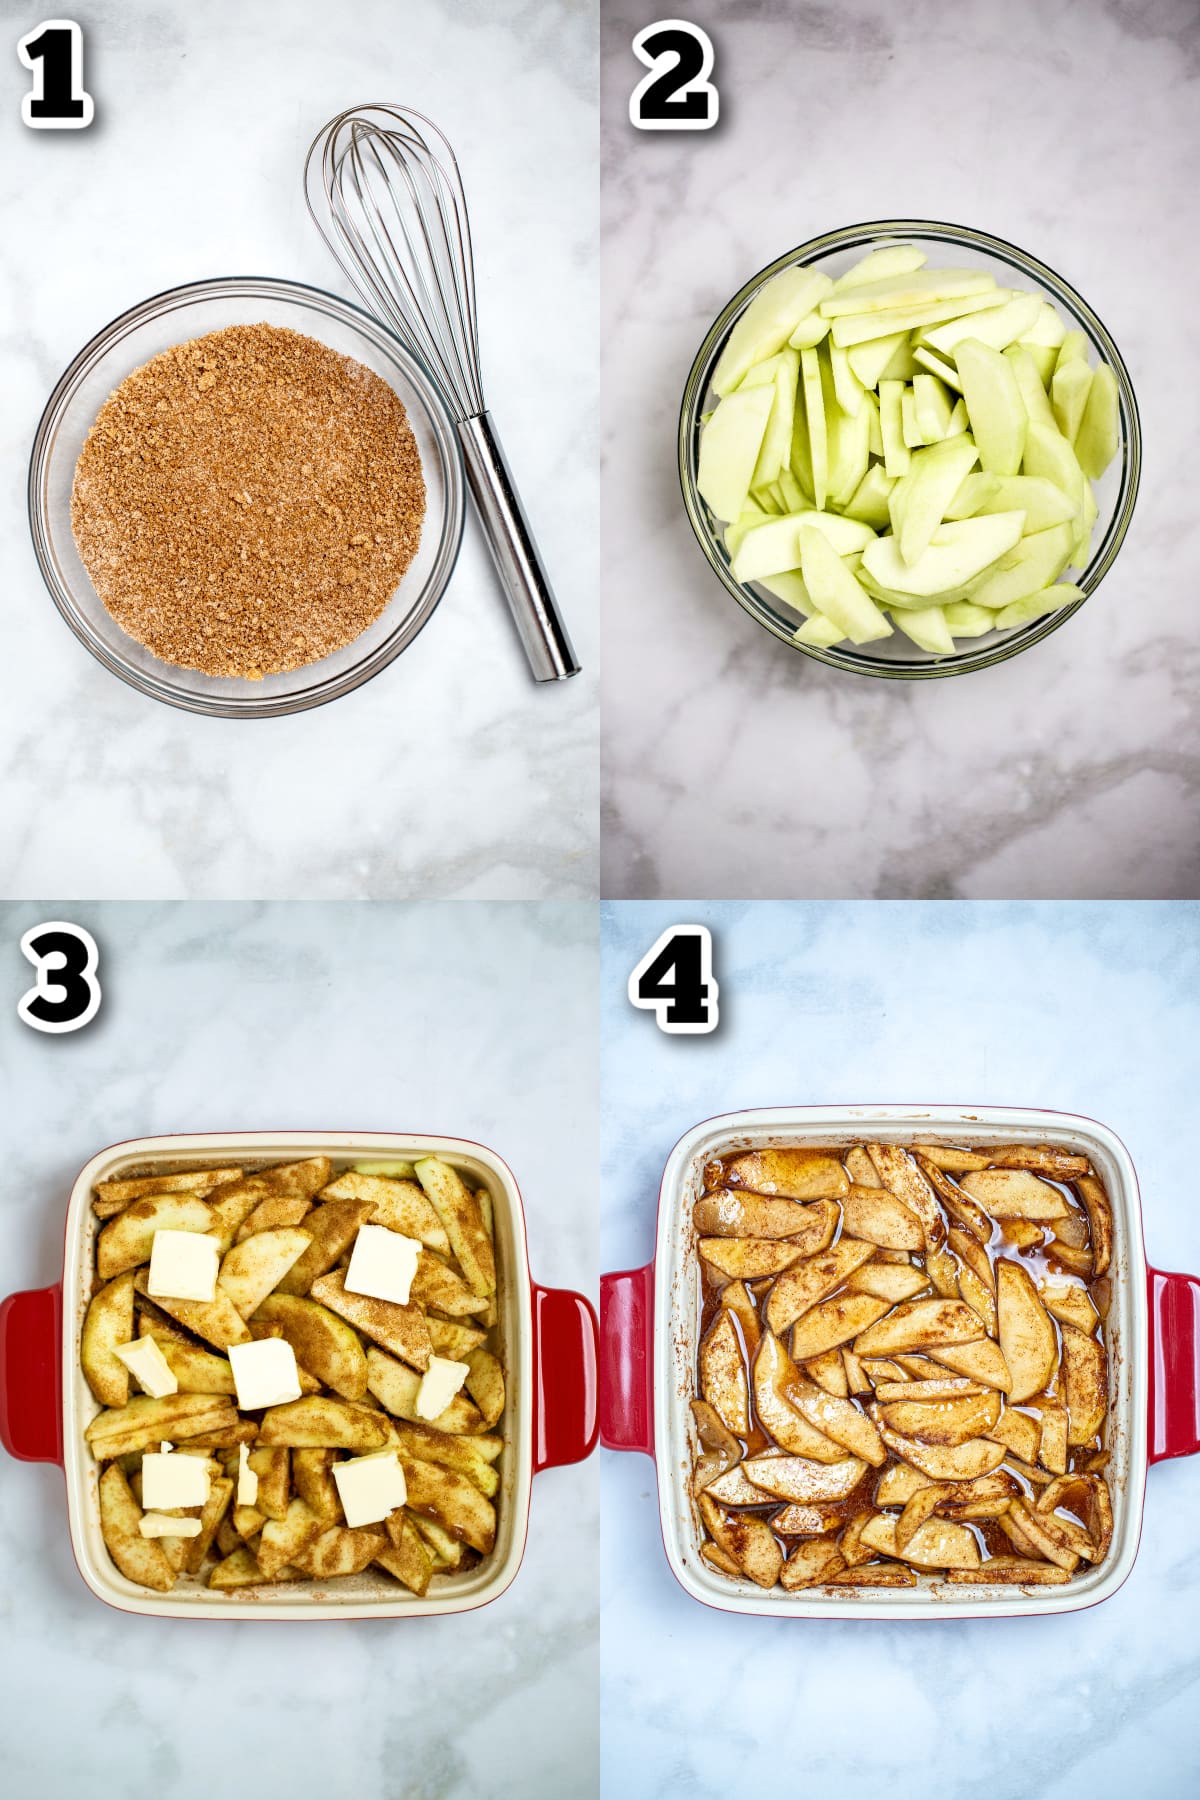 Step by step photos for how to make cinnamon baked apple slices.